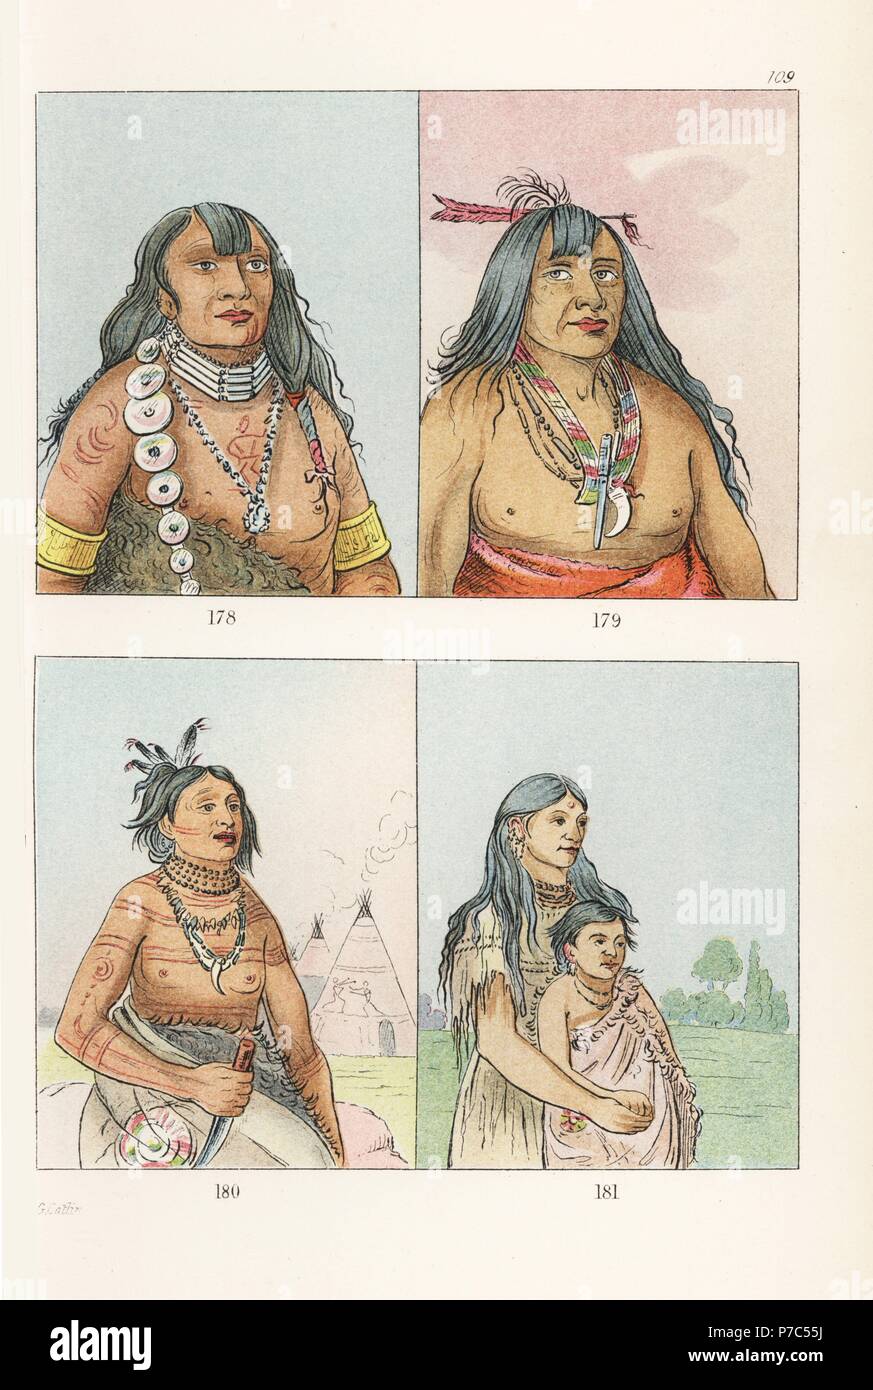 Kiowa chief Teh-toot-sah 178, Bon-son-gee, New Fire 179, Quay-ham-kay, Stone Shell 180, and young girl Wun-pan-to-mee, White Weasel, and her brother Tunk-aht-oh-ye, Thunderer 181. Handcoloured lithograph from George Catlin's Manners, Customs and Condition of the North American Indians, London, 1841. Stock Photo